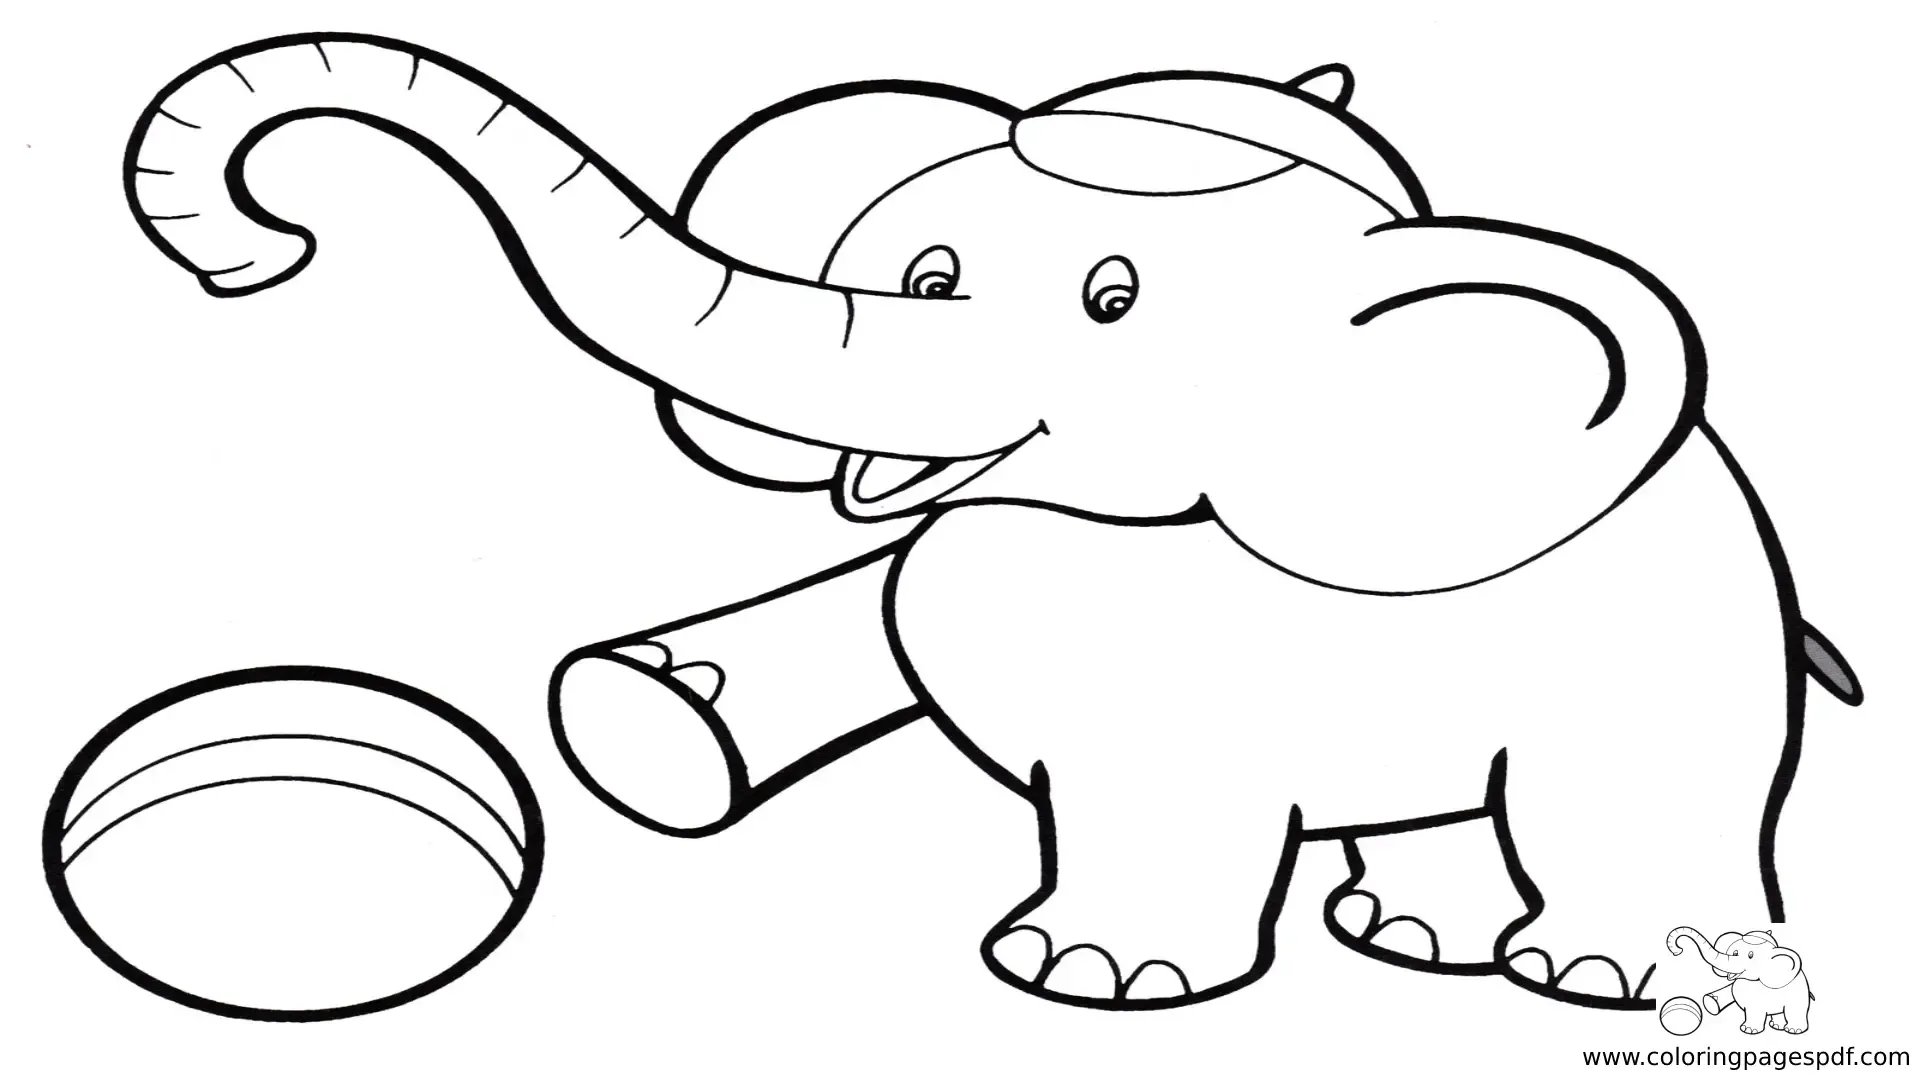 Coloring Pages Of A Small Elephant Playing With Ball